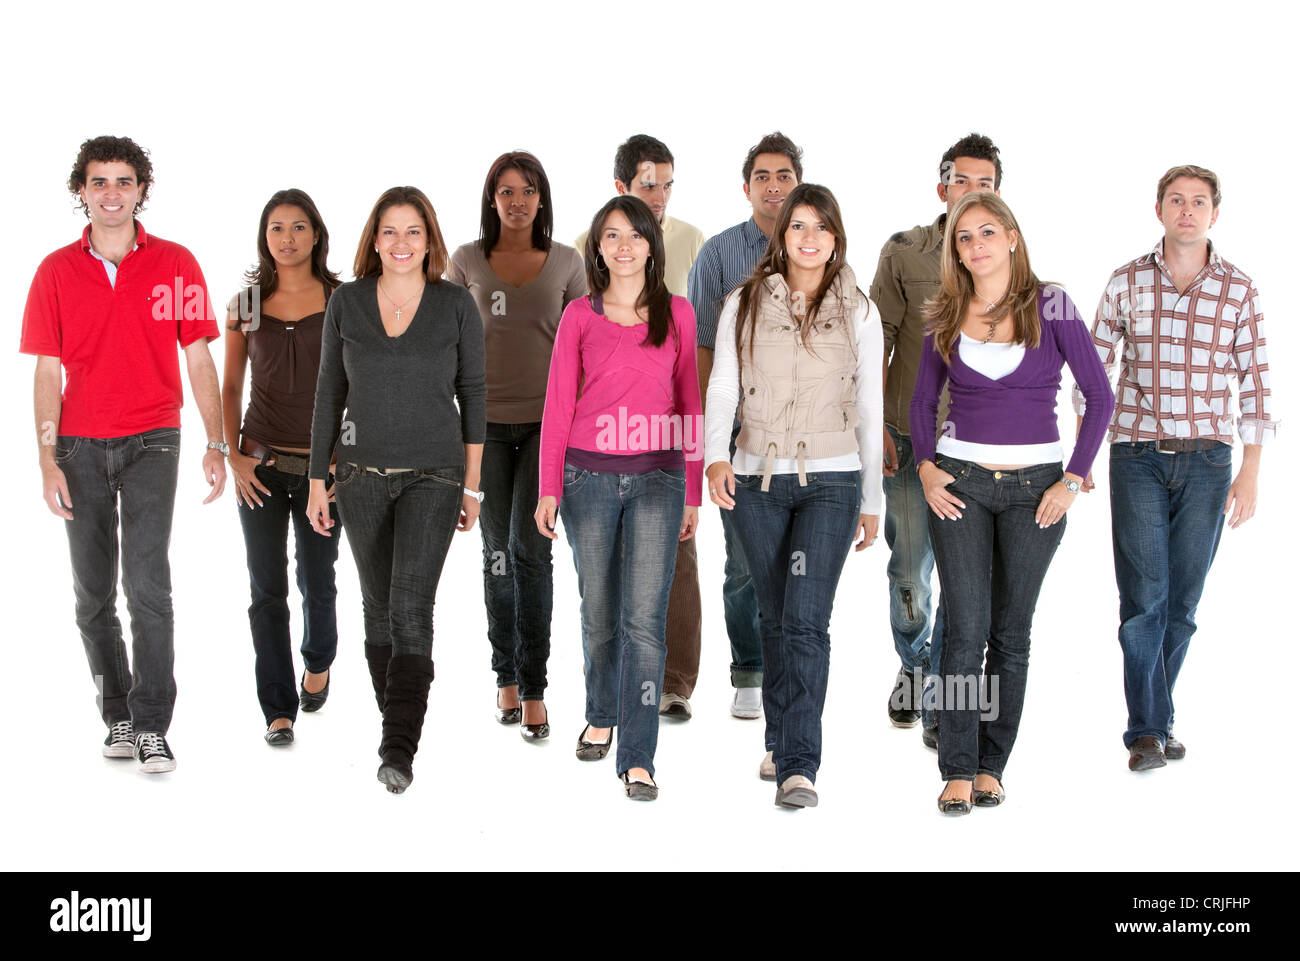 group of young people walking and smiling Stock Photo